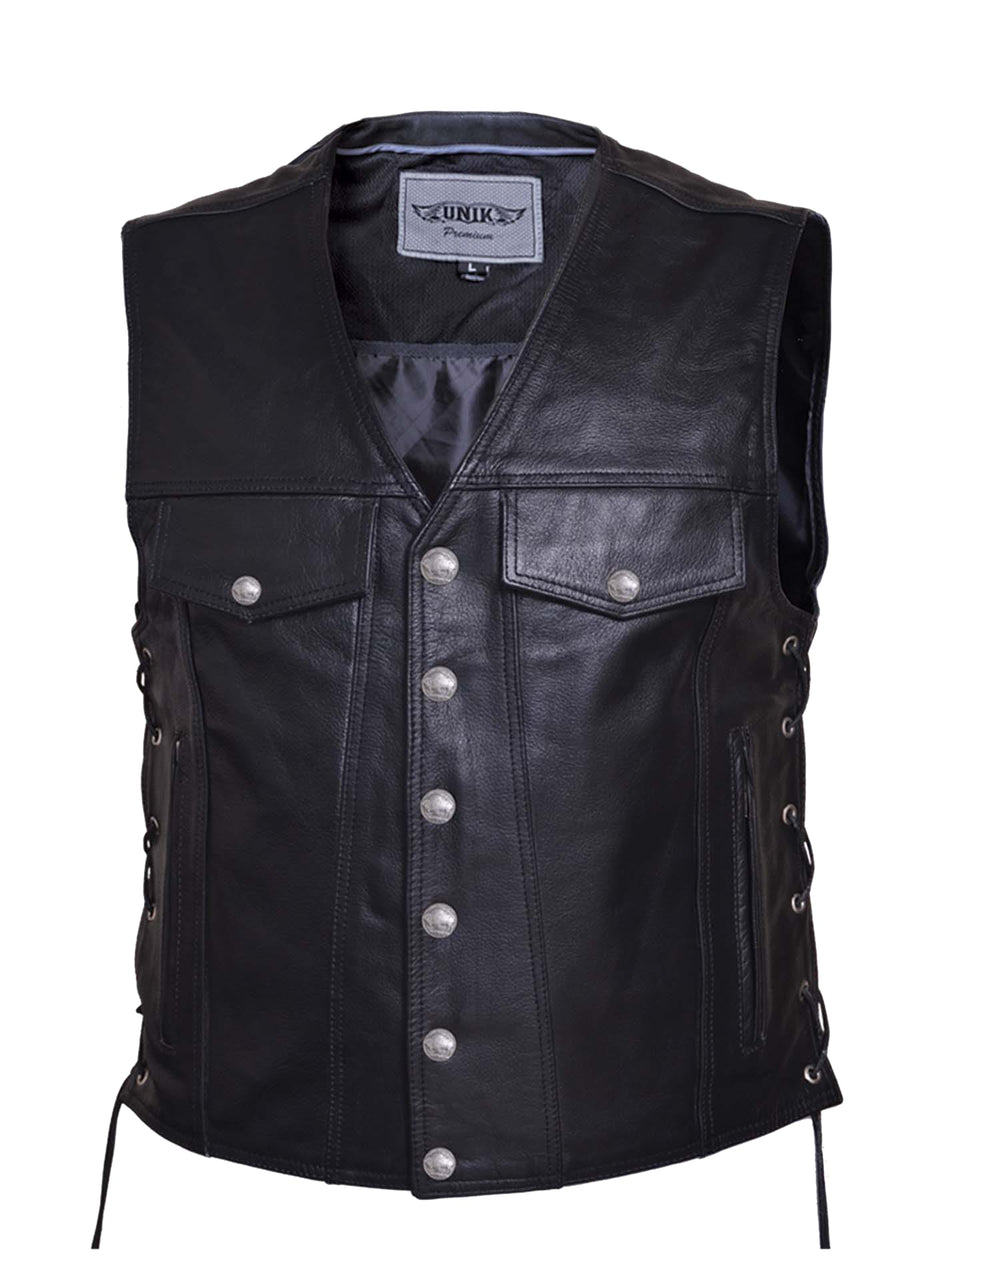 Men's Premium Leather Motorcycle Vest Biker Club Leather with Gun pockets one piece back for patches - HighwayLeather